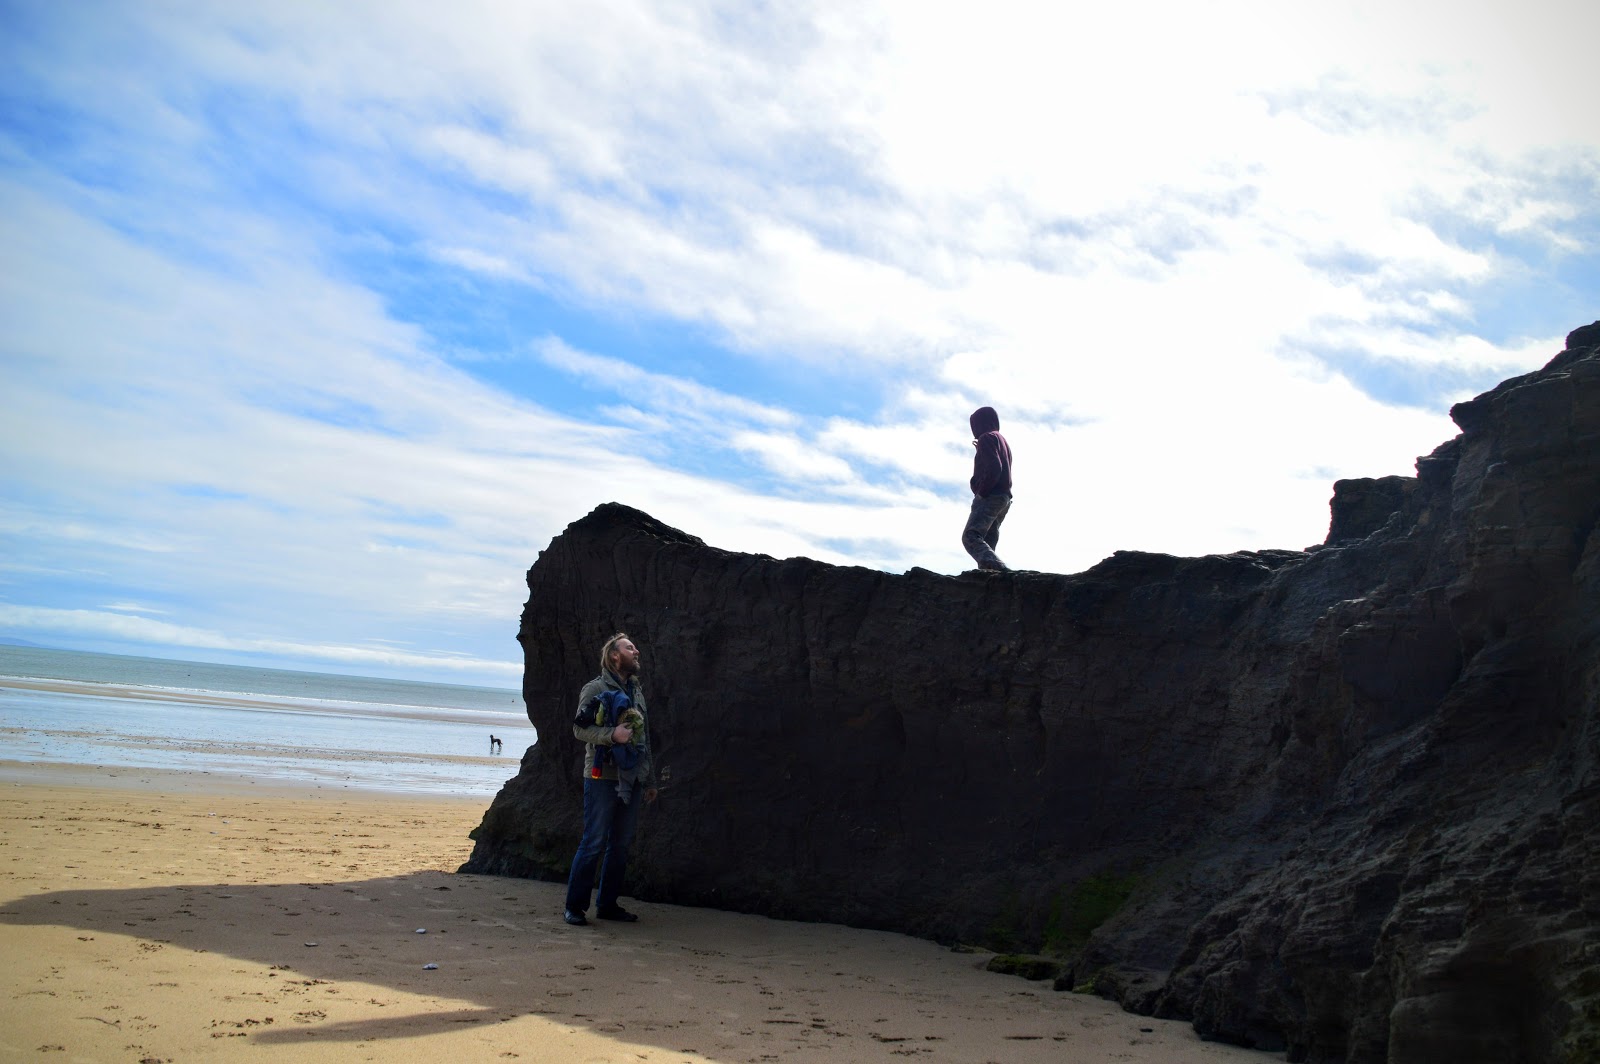 , Family Fun:  A Winter&#8217;s Day on Saundersfoot Beach, Pembrokeshire